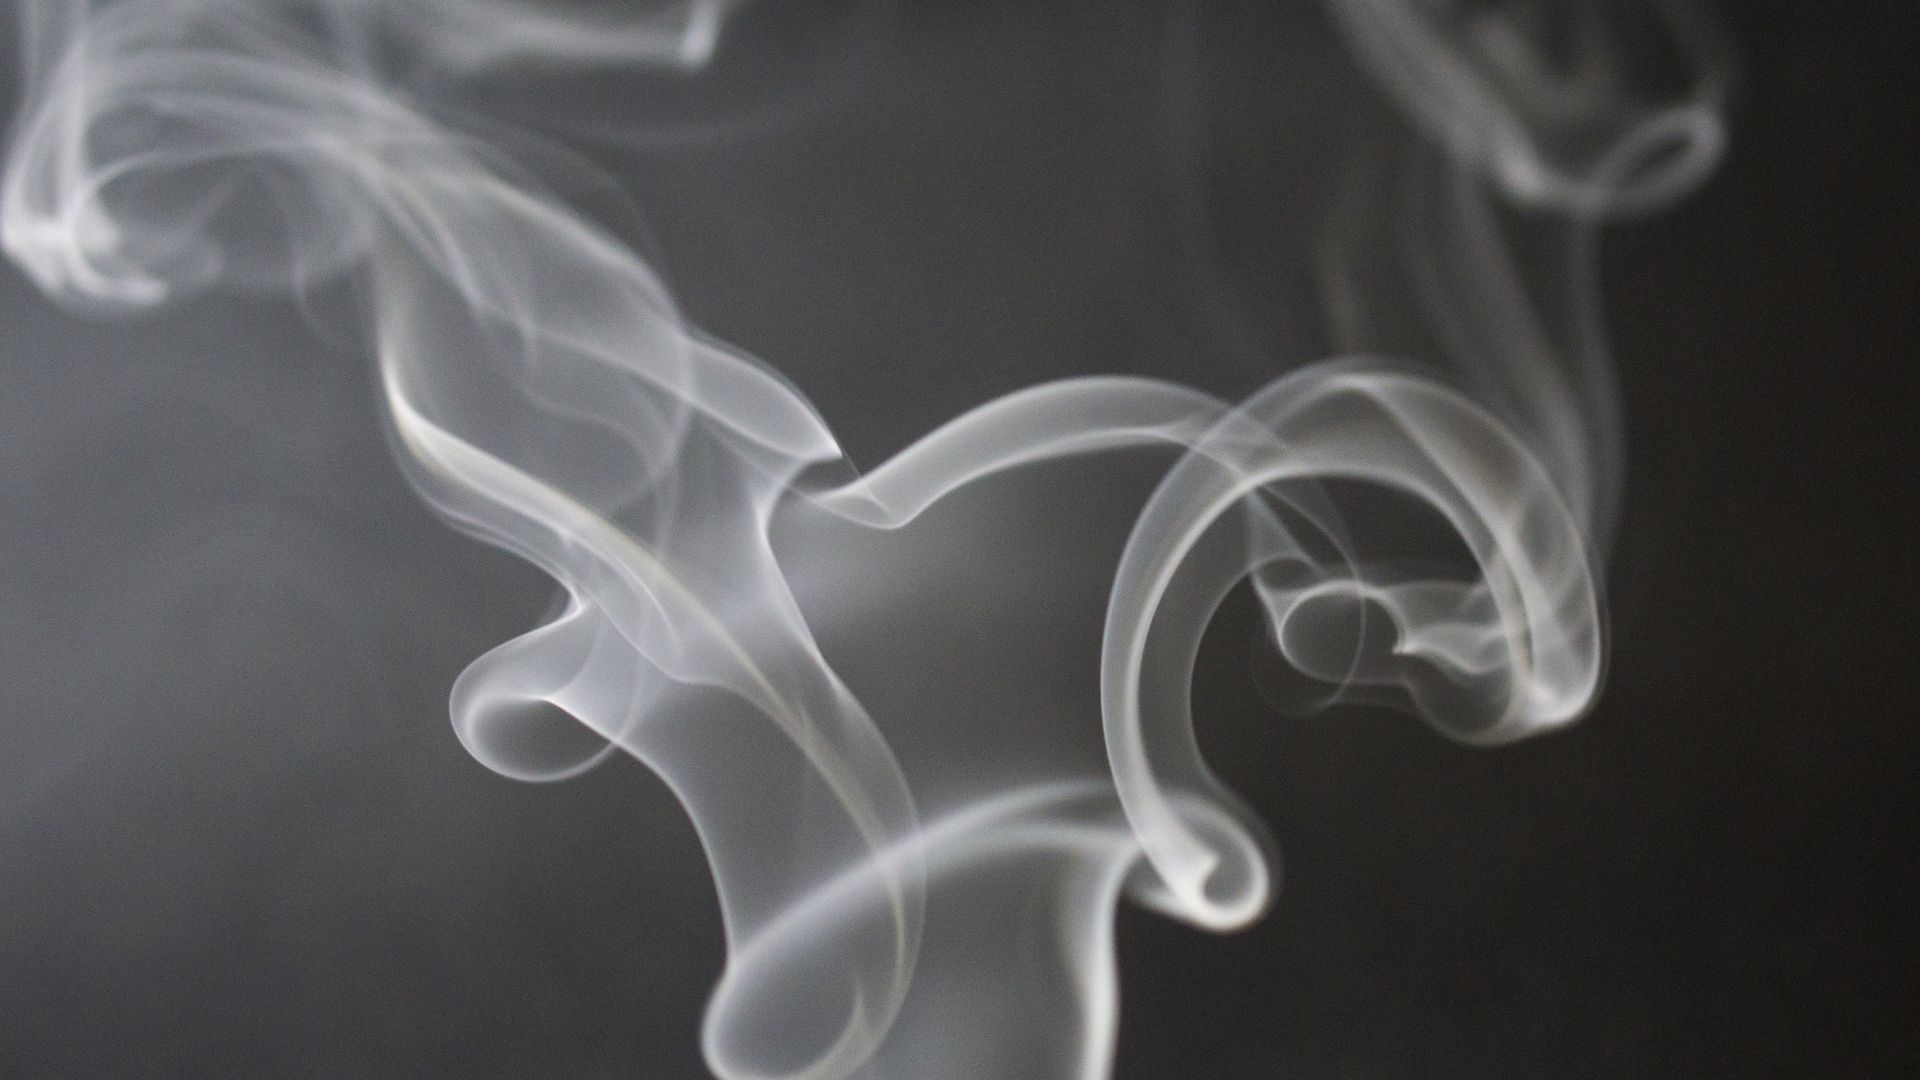 How To Get Rid Of The Smoke Smell After A Fire in Your Business Or Home